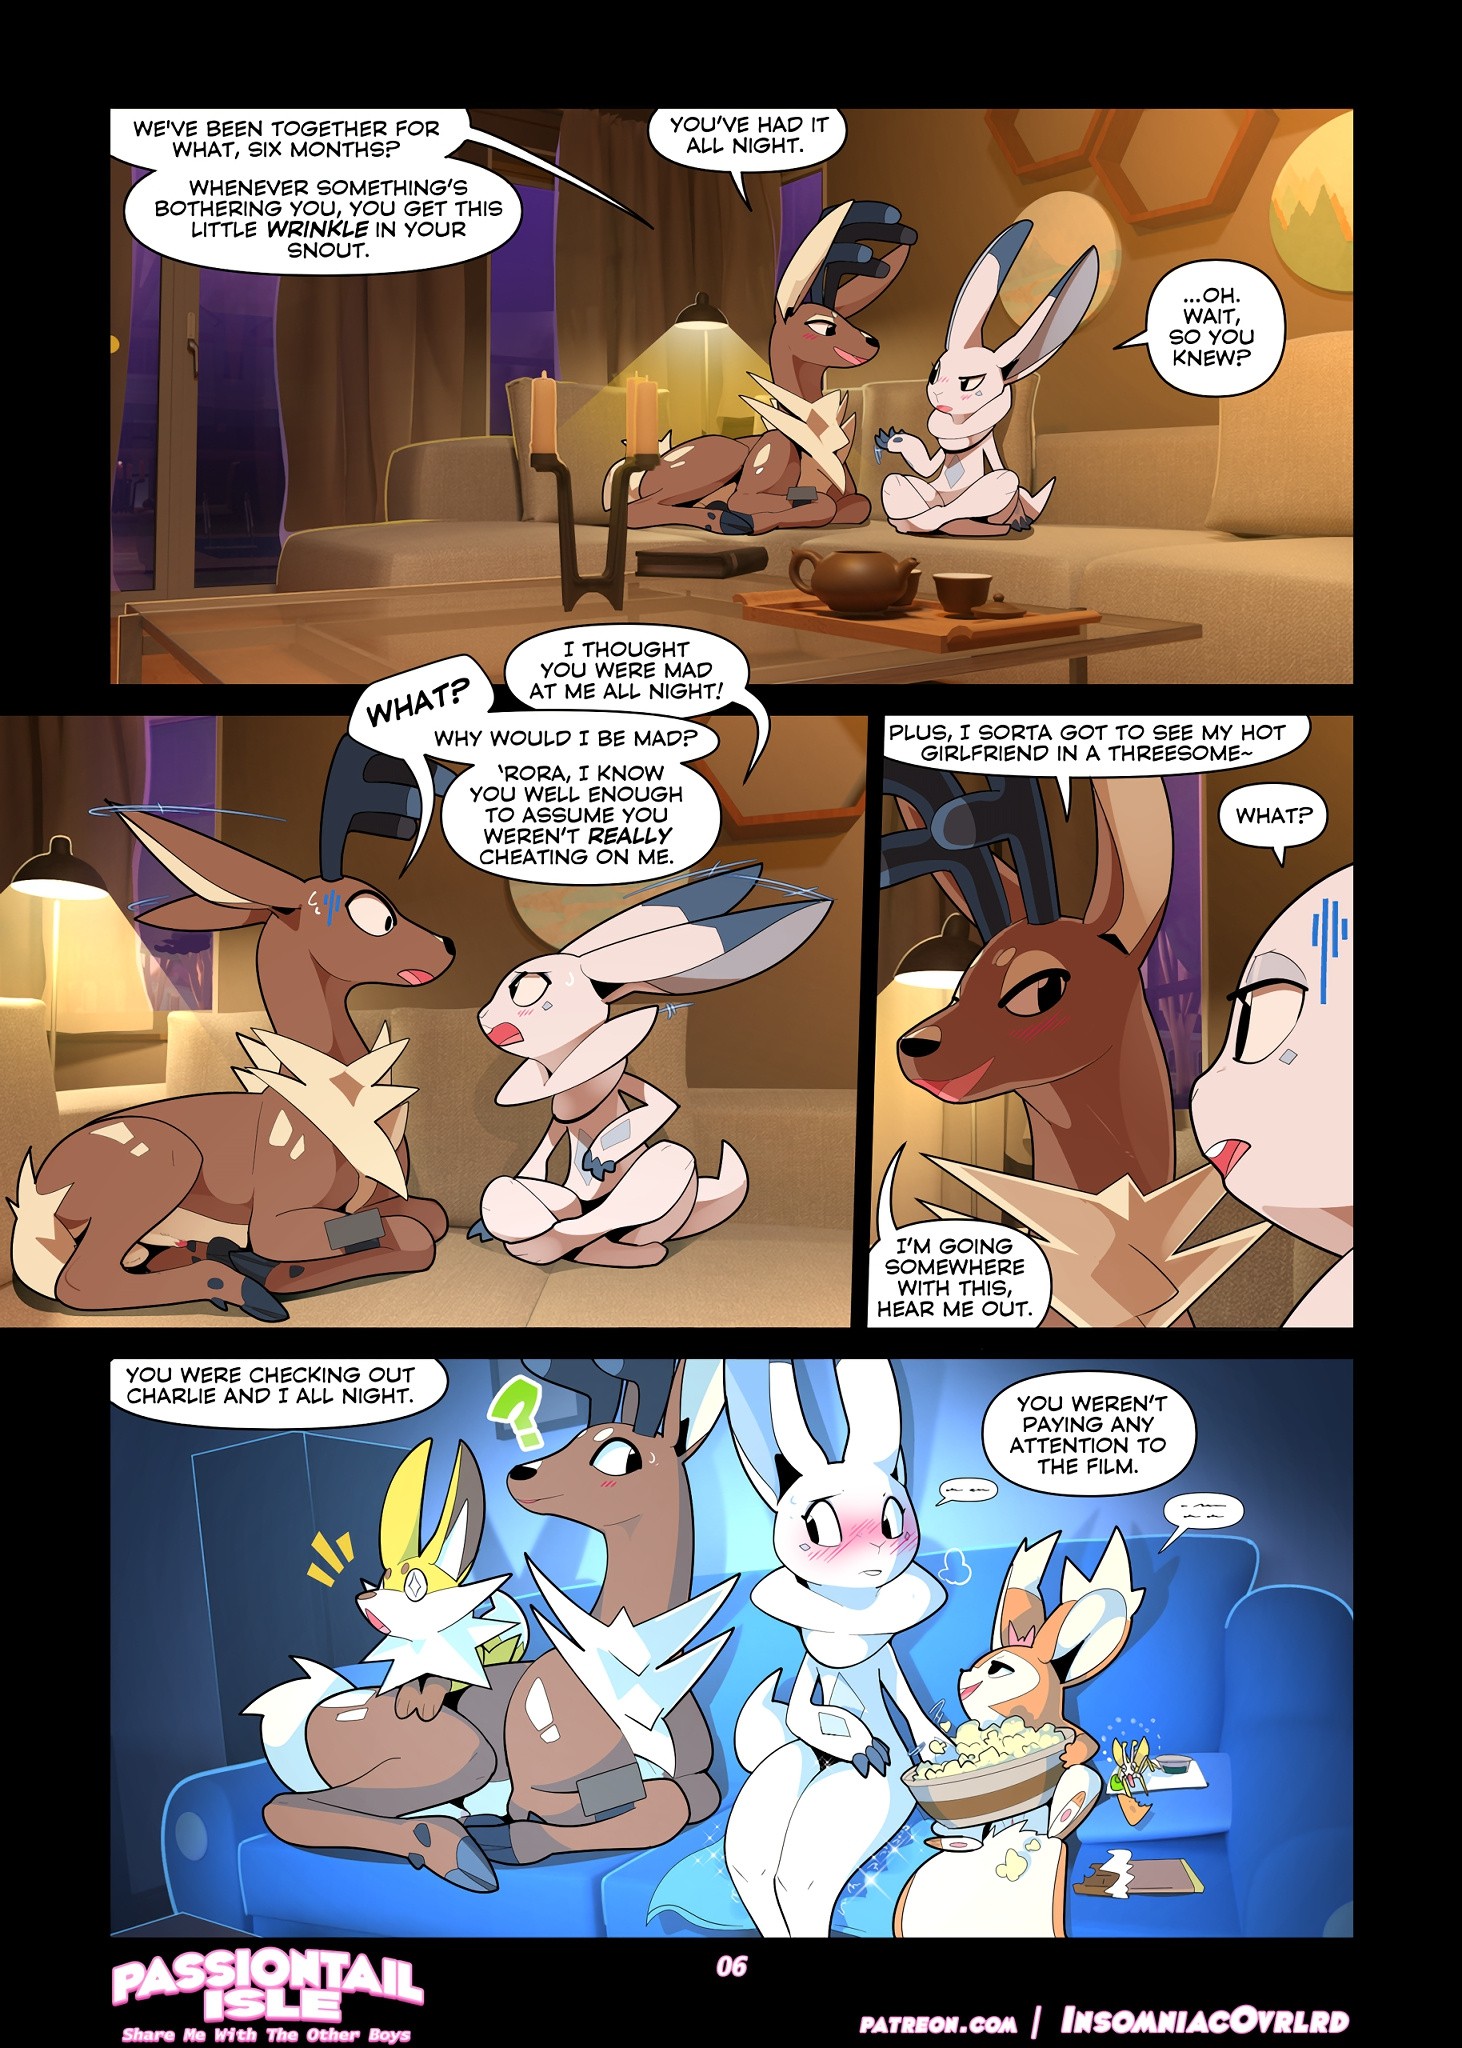 Passiontail Isle: Share Me With The Other Boys porn comic picture 7